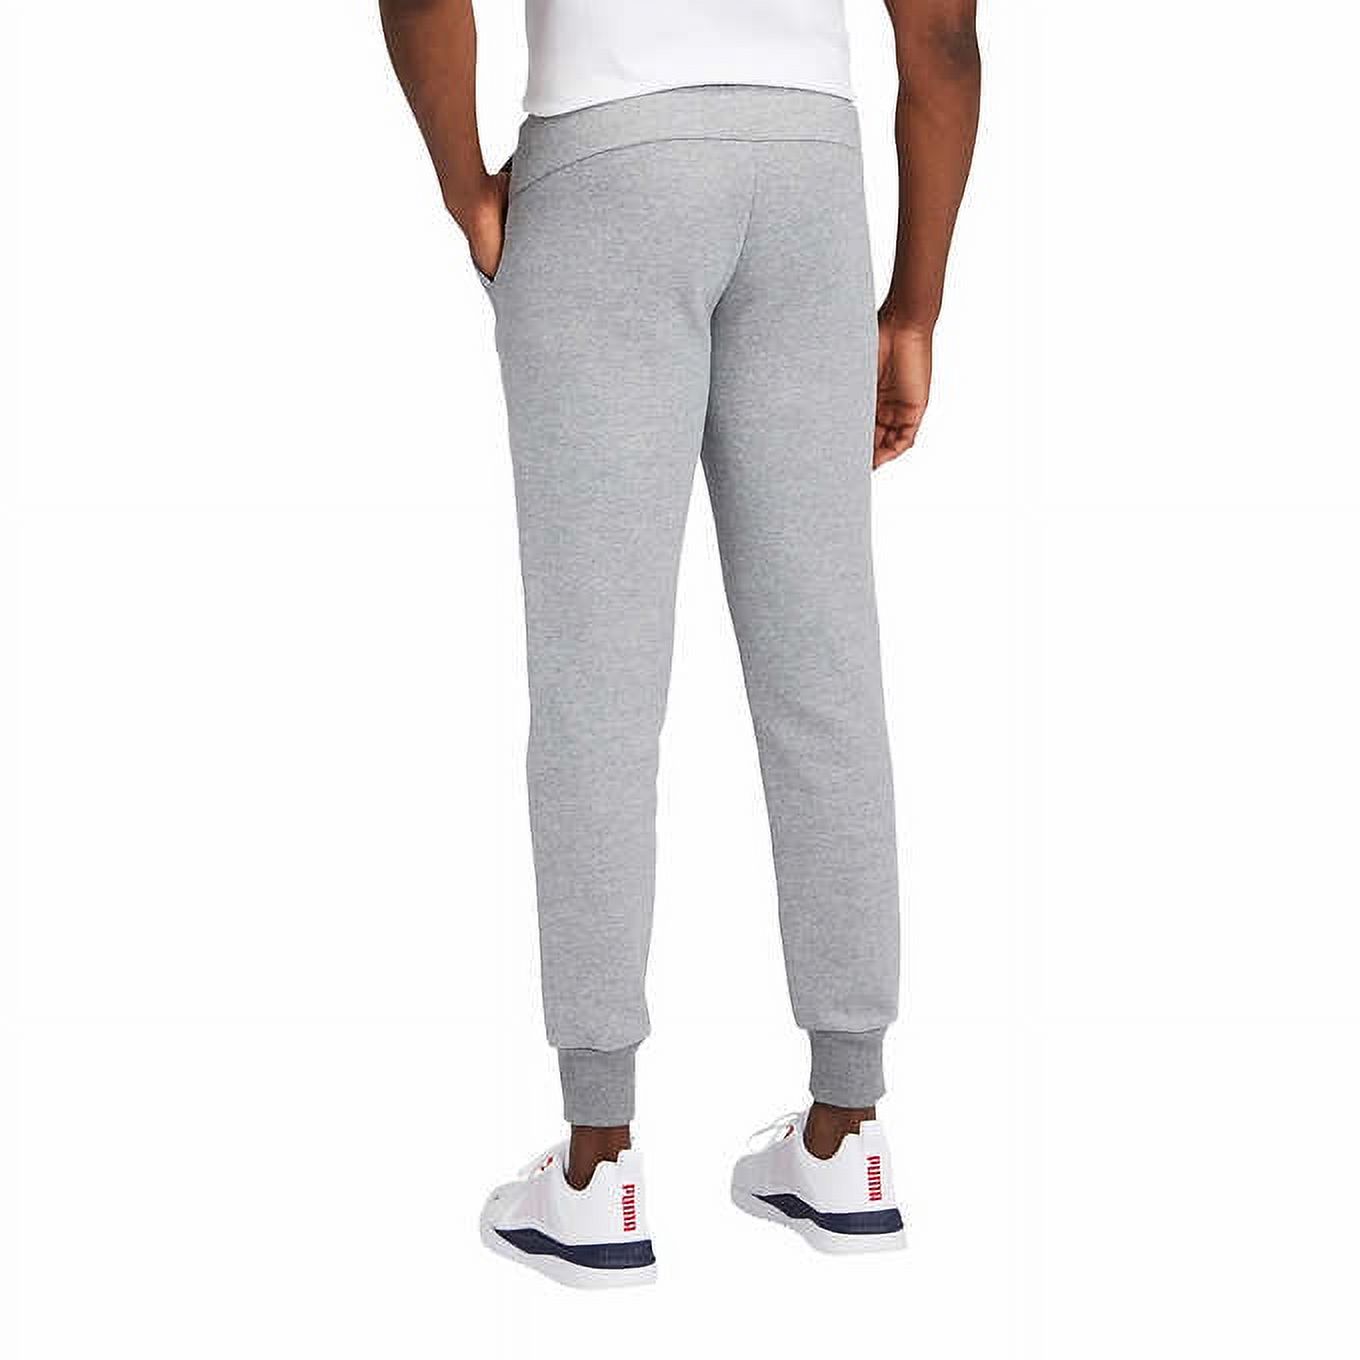 Puma Men's Fleece Lined Tapered Leg Cuffed Athletic Sweatpants (Gray, X-Large) - image 4 of 4